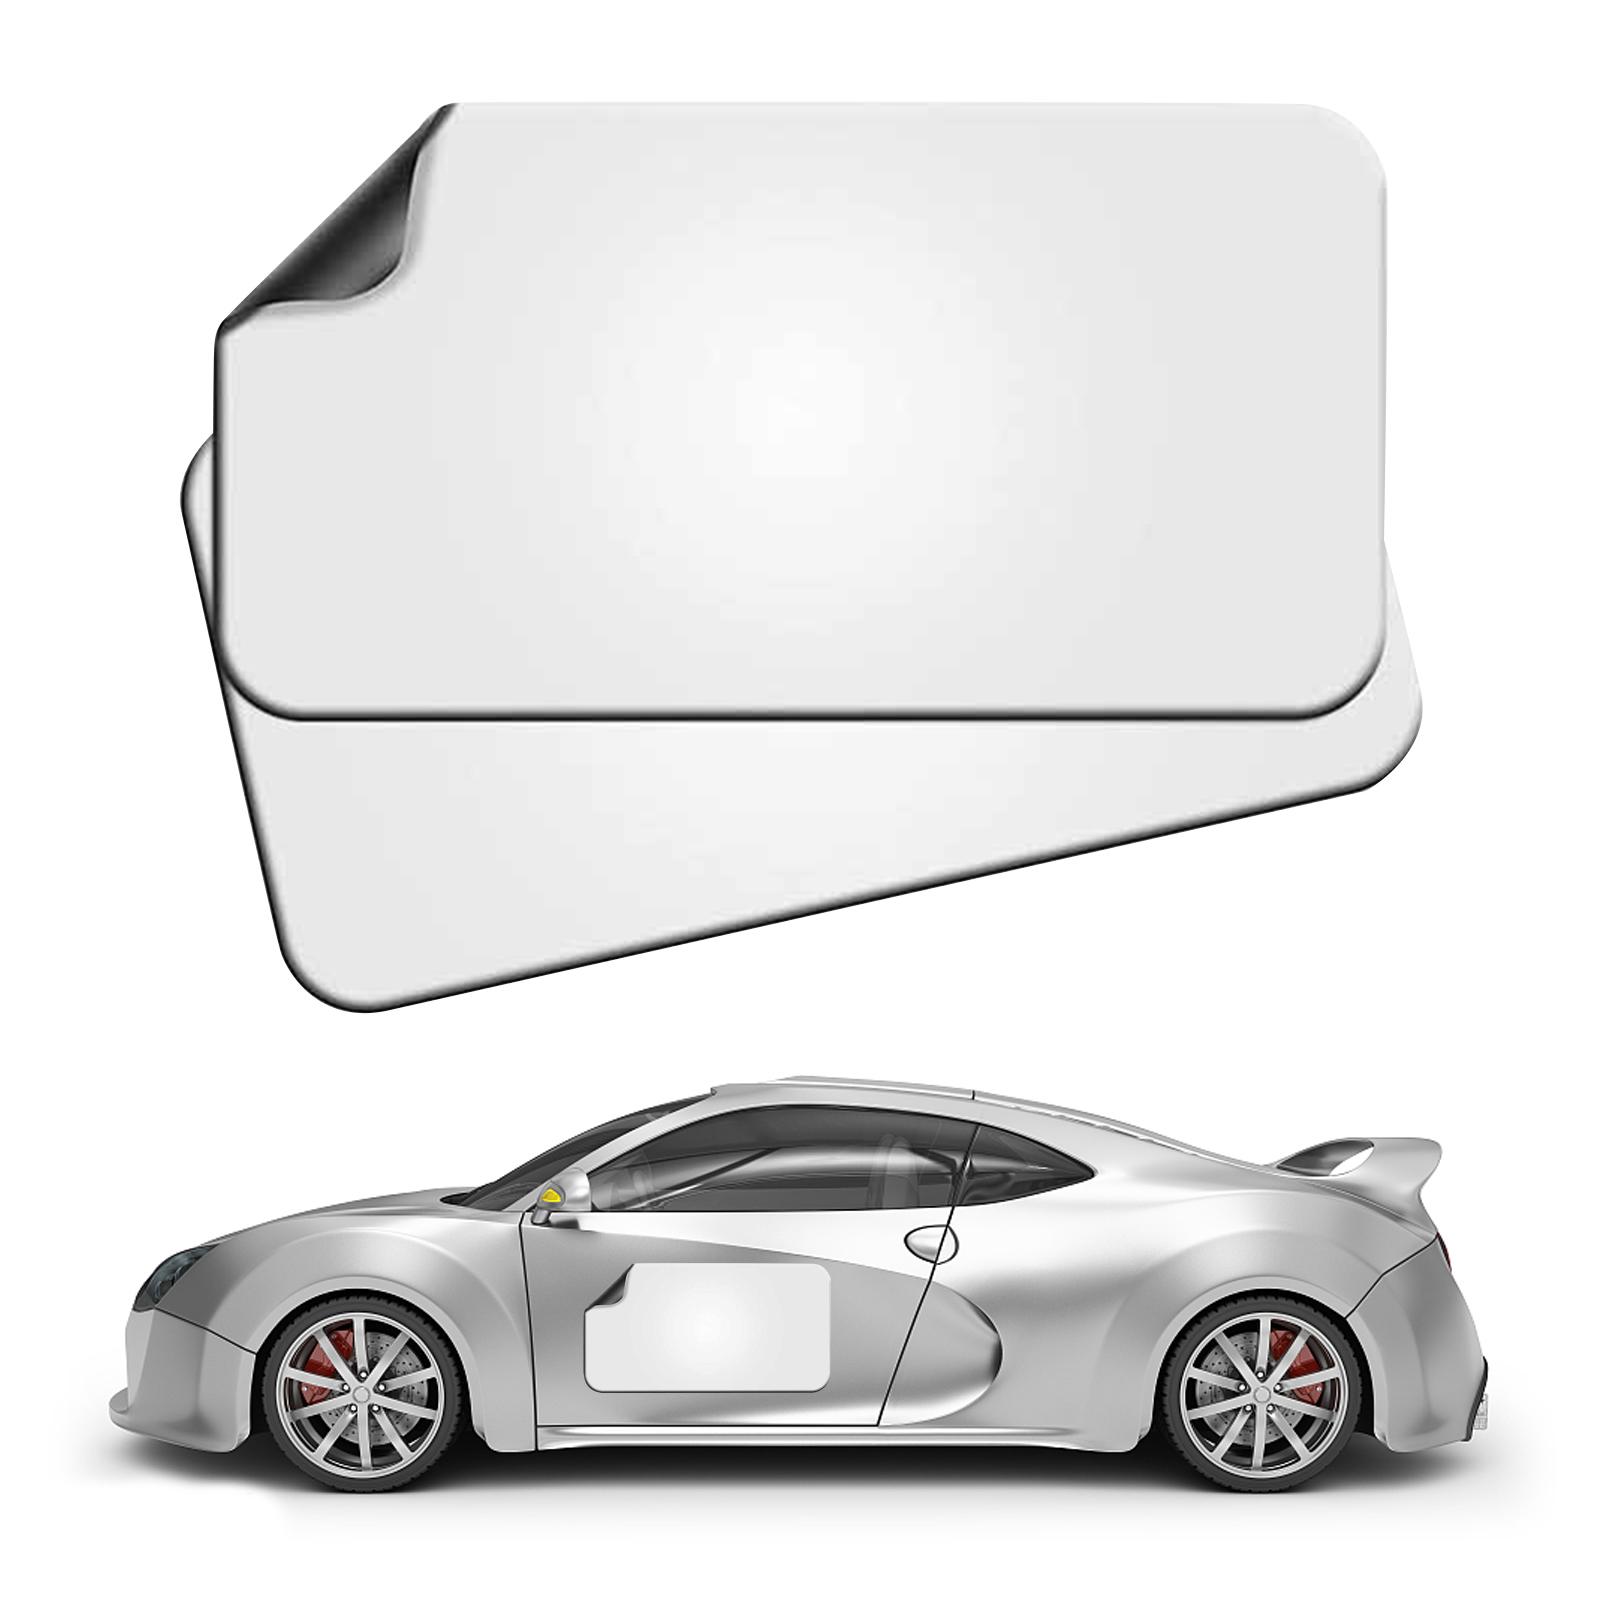 2x Blank Magnets Rounded Corners for Marketing Vehicles Cars Commercial Style A 